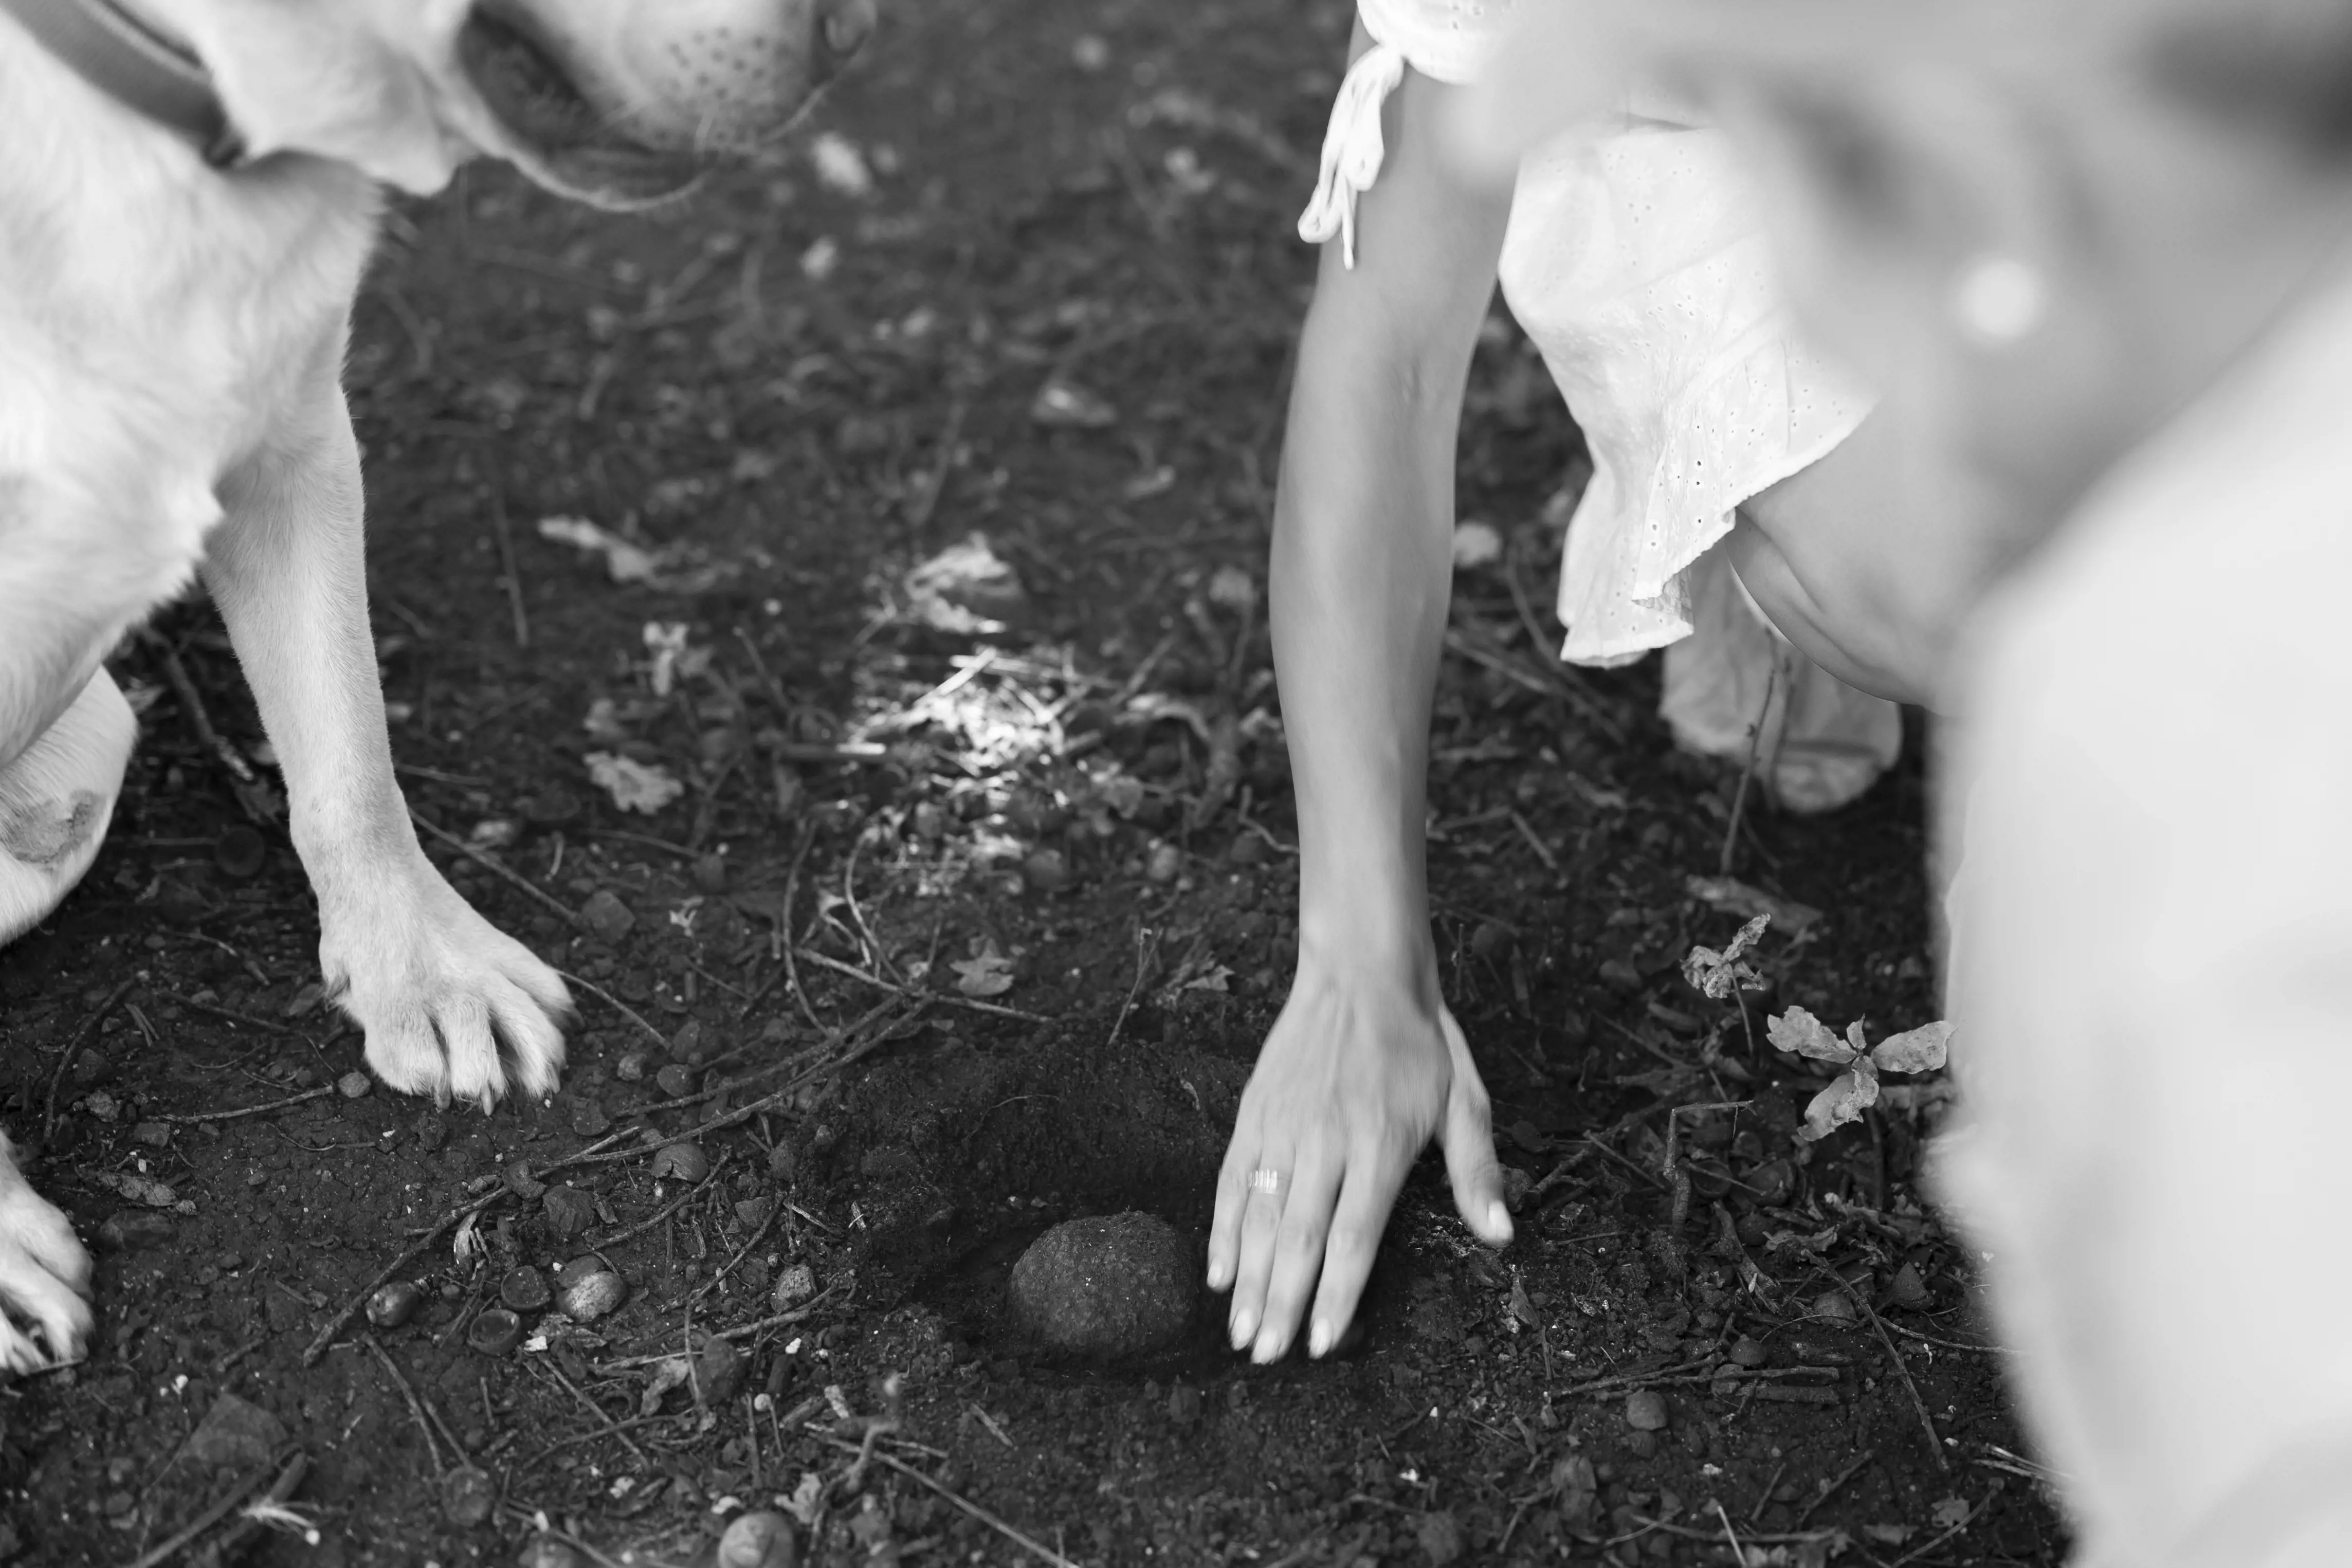 A woman and a dog site next to a small hole in the ground revealing a tennis ball sized truffle.